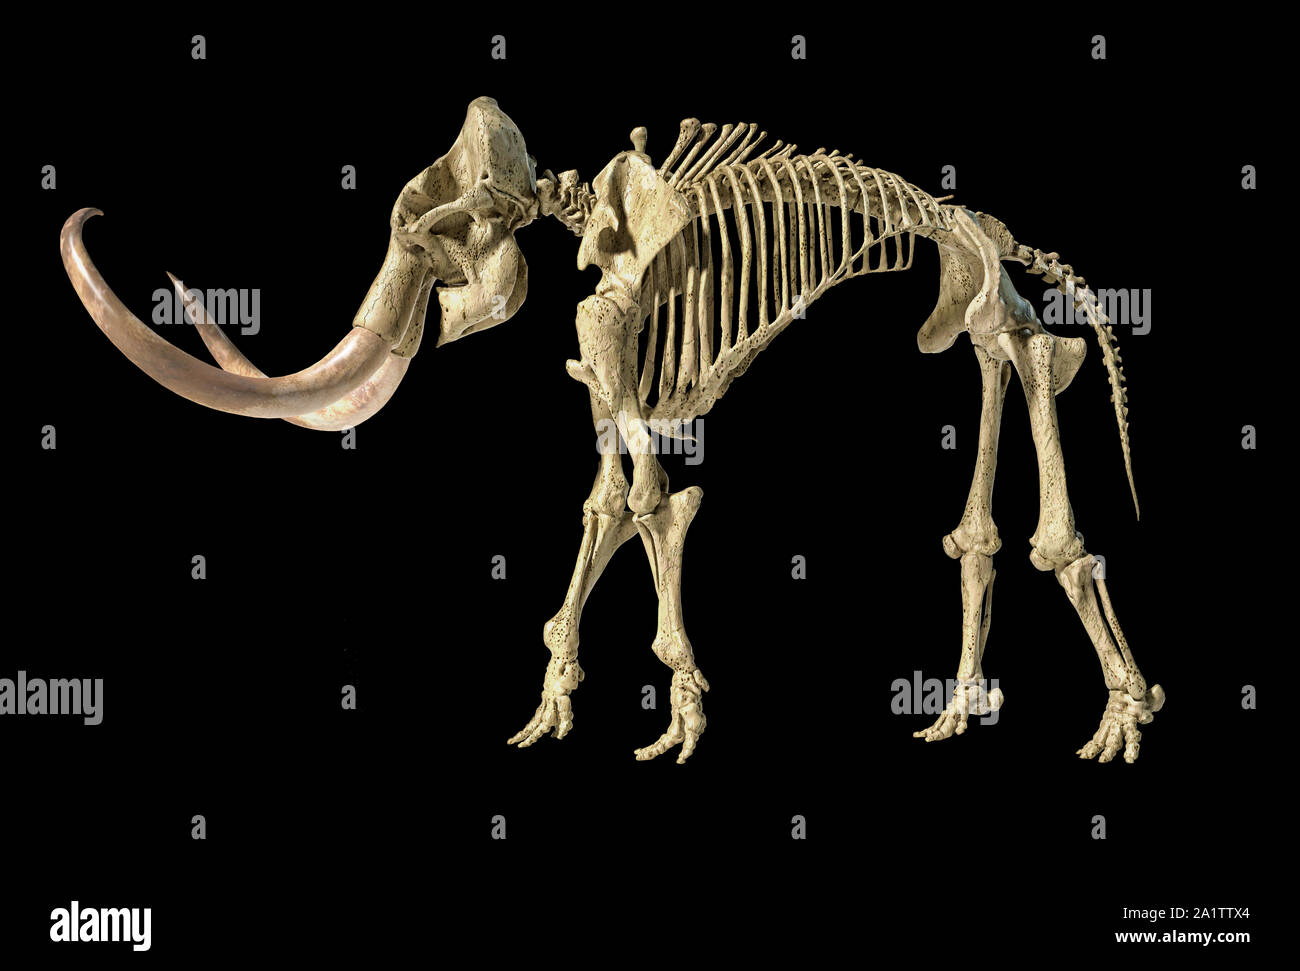 Woolly mammoth skeleton, realistic 3d illustration, viewed from a side. On black background. Stock Photo